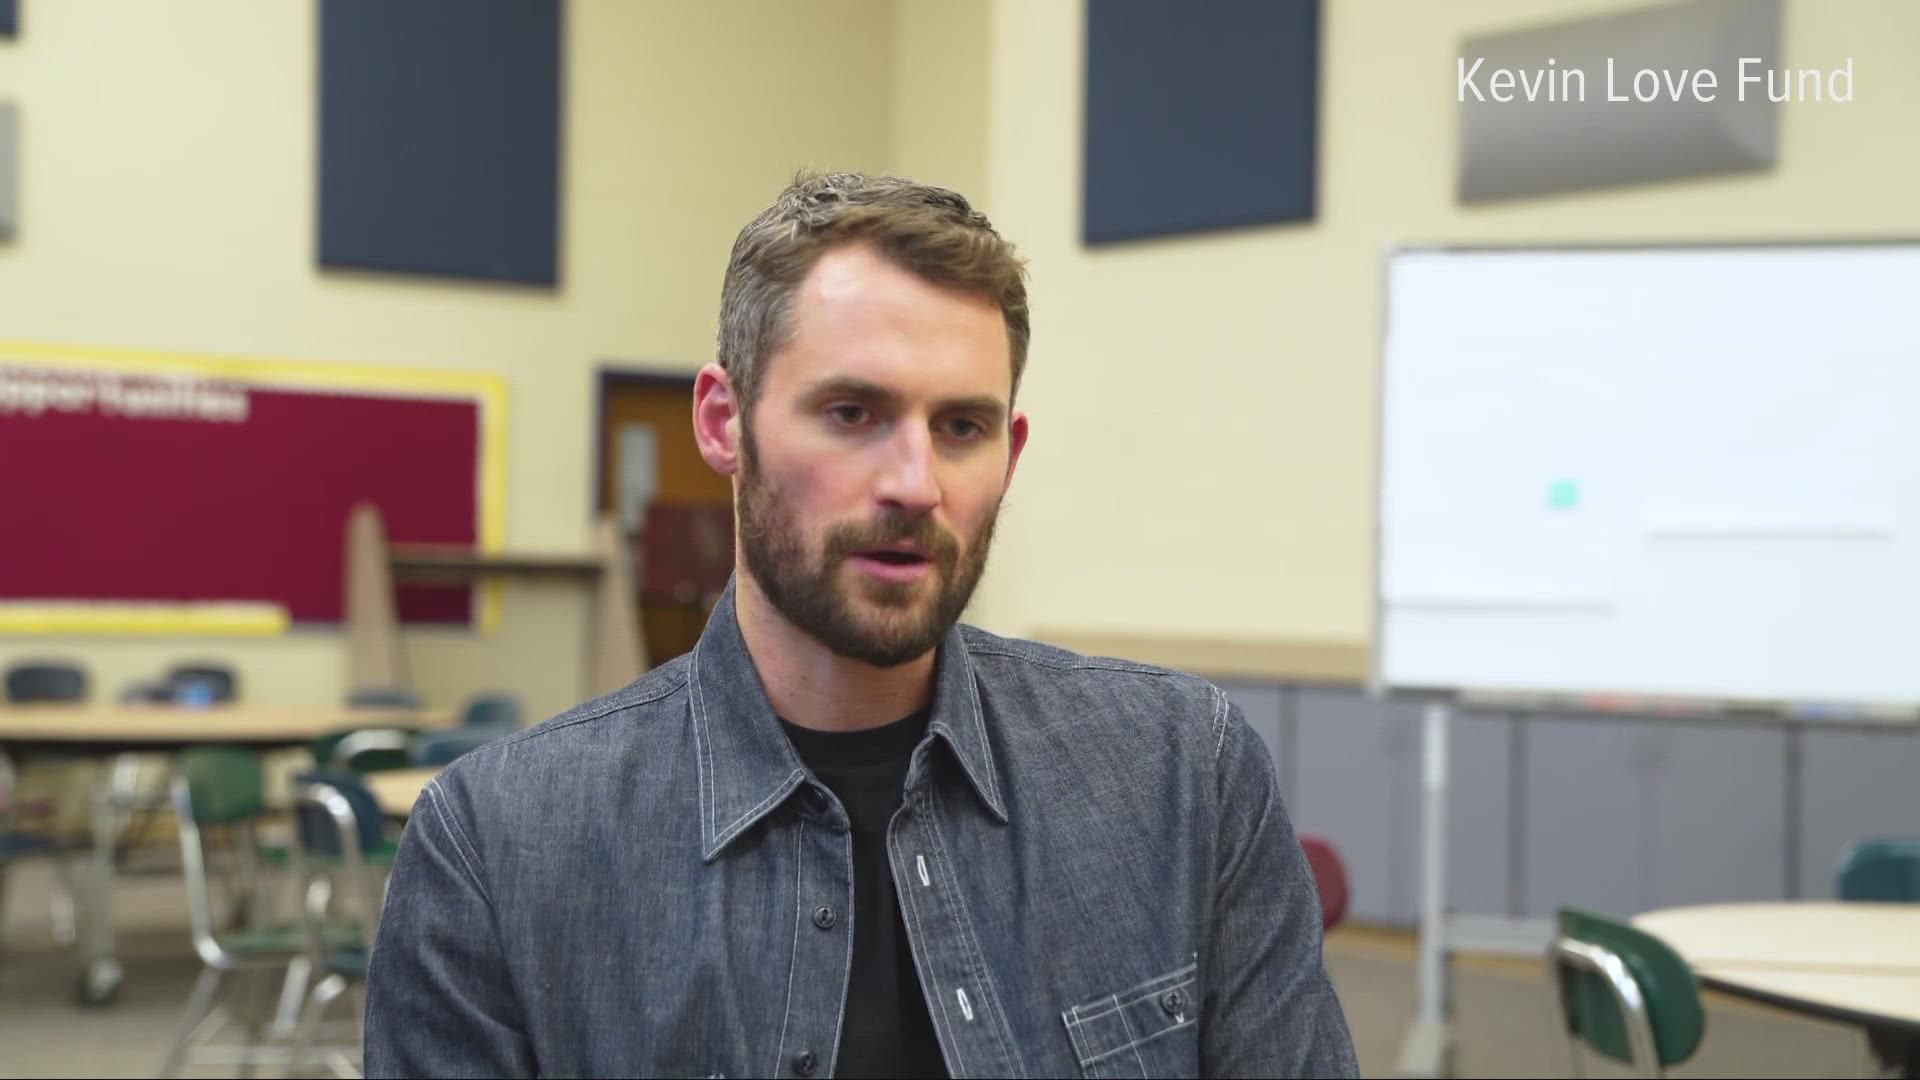 The summit is bigger than ever thanks to Kevin Love and his passion about helping people with their mental health.